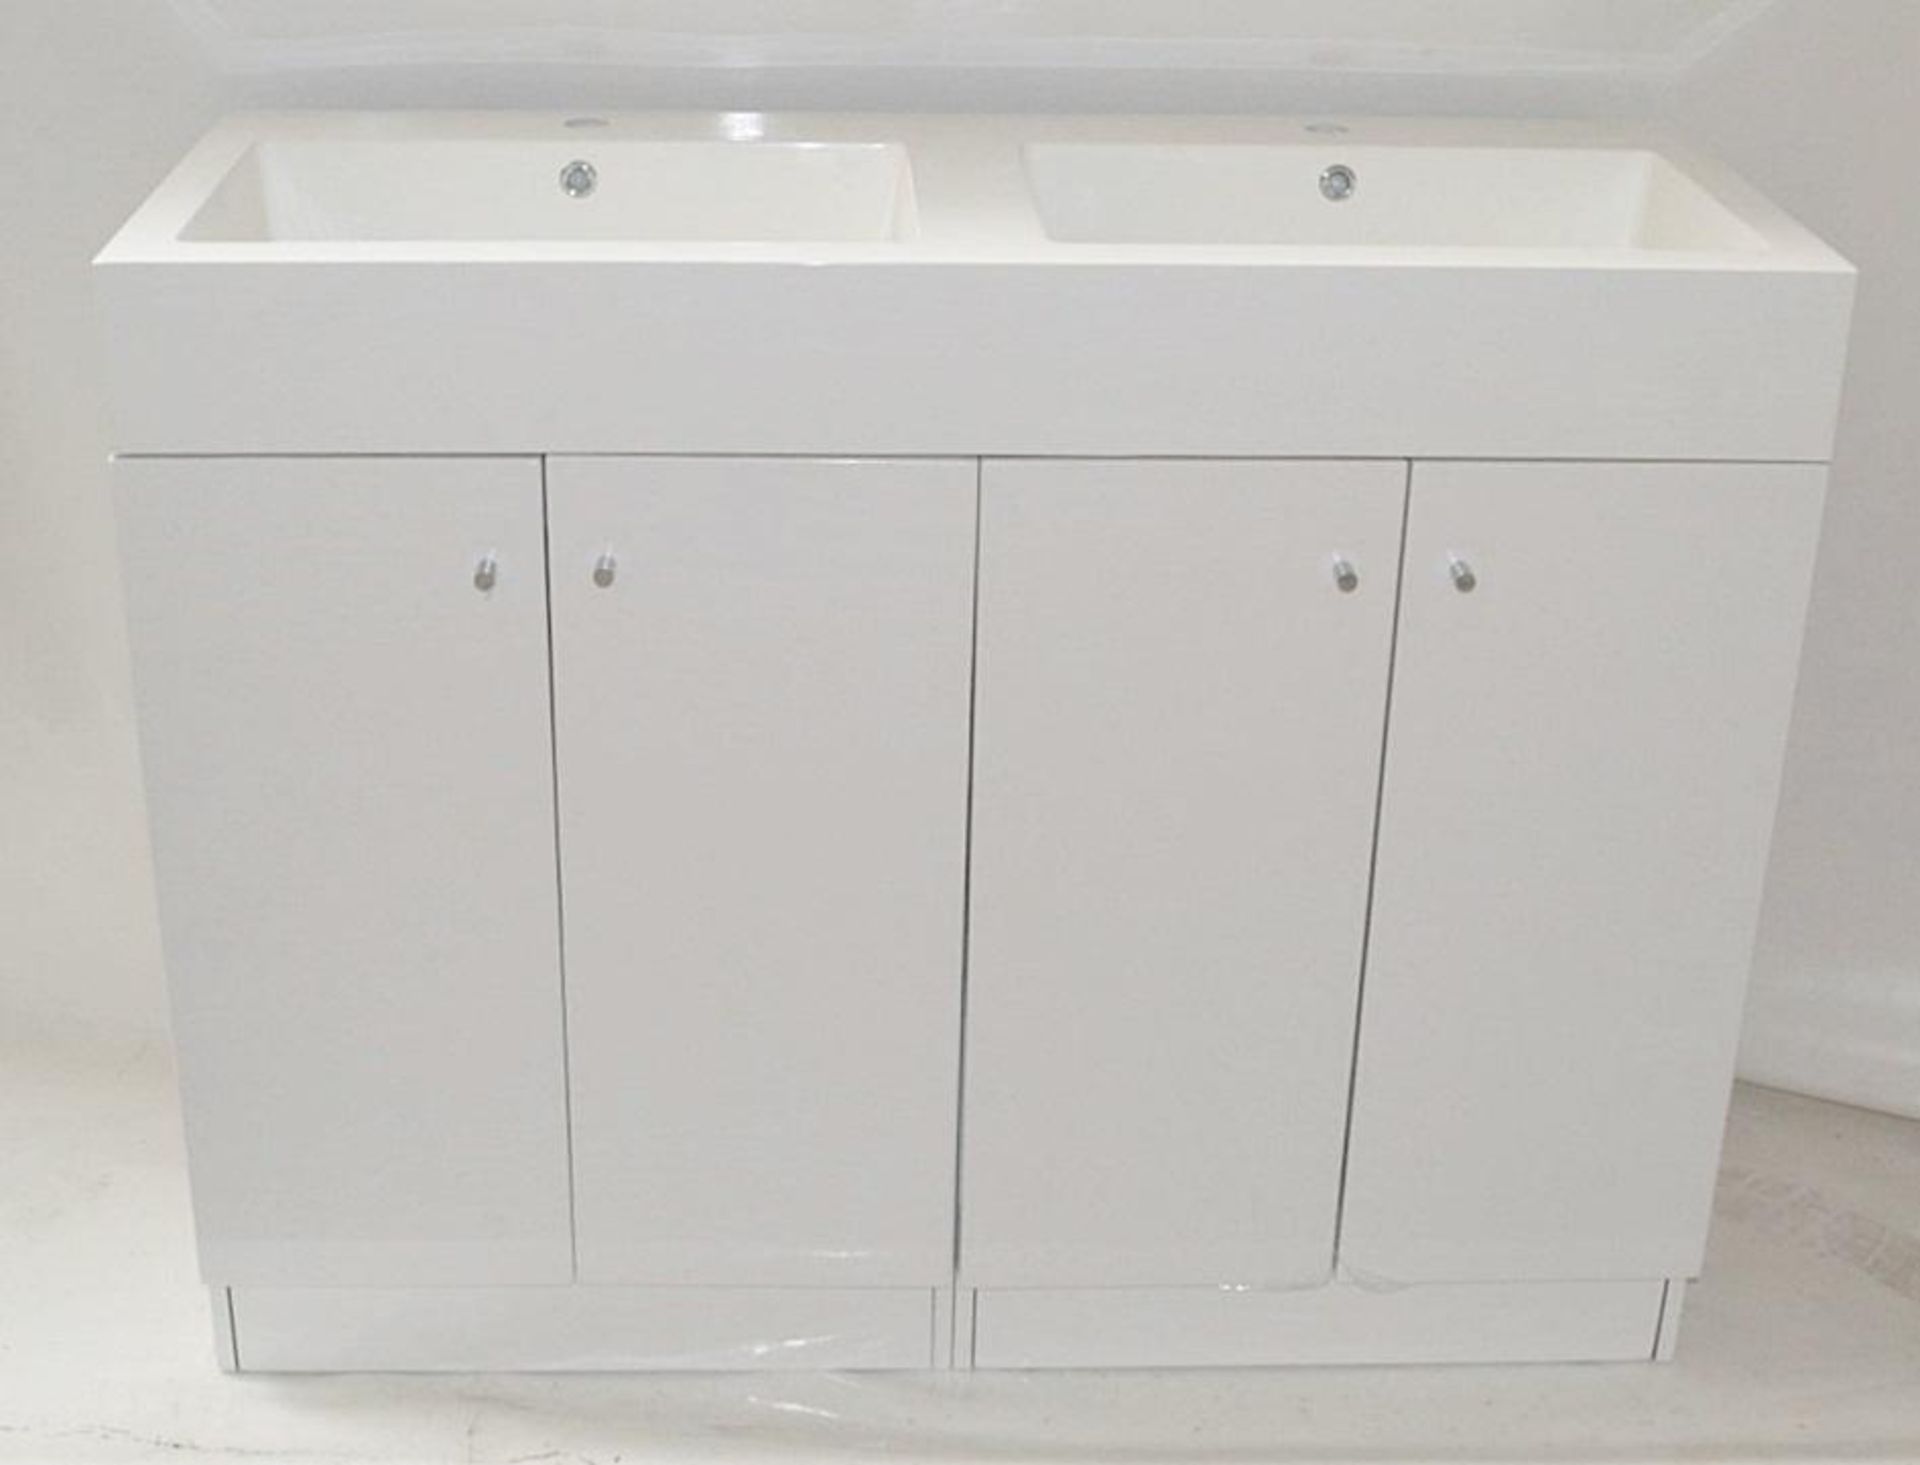 1 x Gloss White 1200mm 4-Door Double Basin Freestanding Bathroom Cabinet - New & Boxed Stock - CL307 - Image 2 of 9